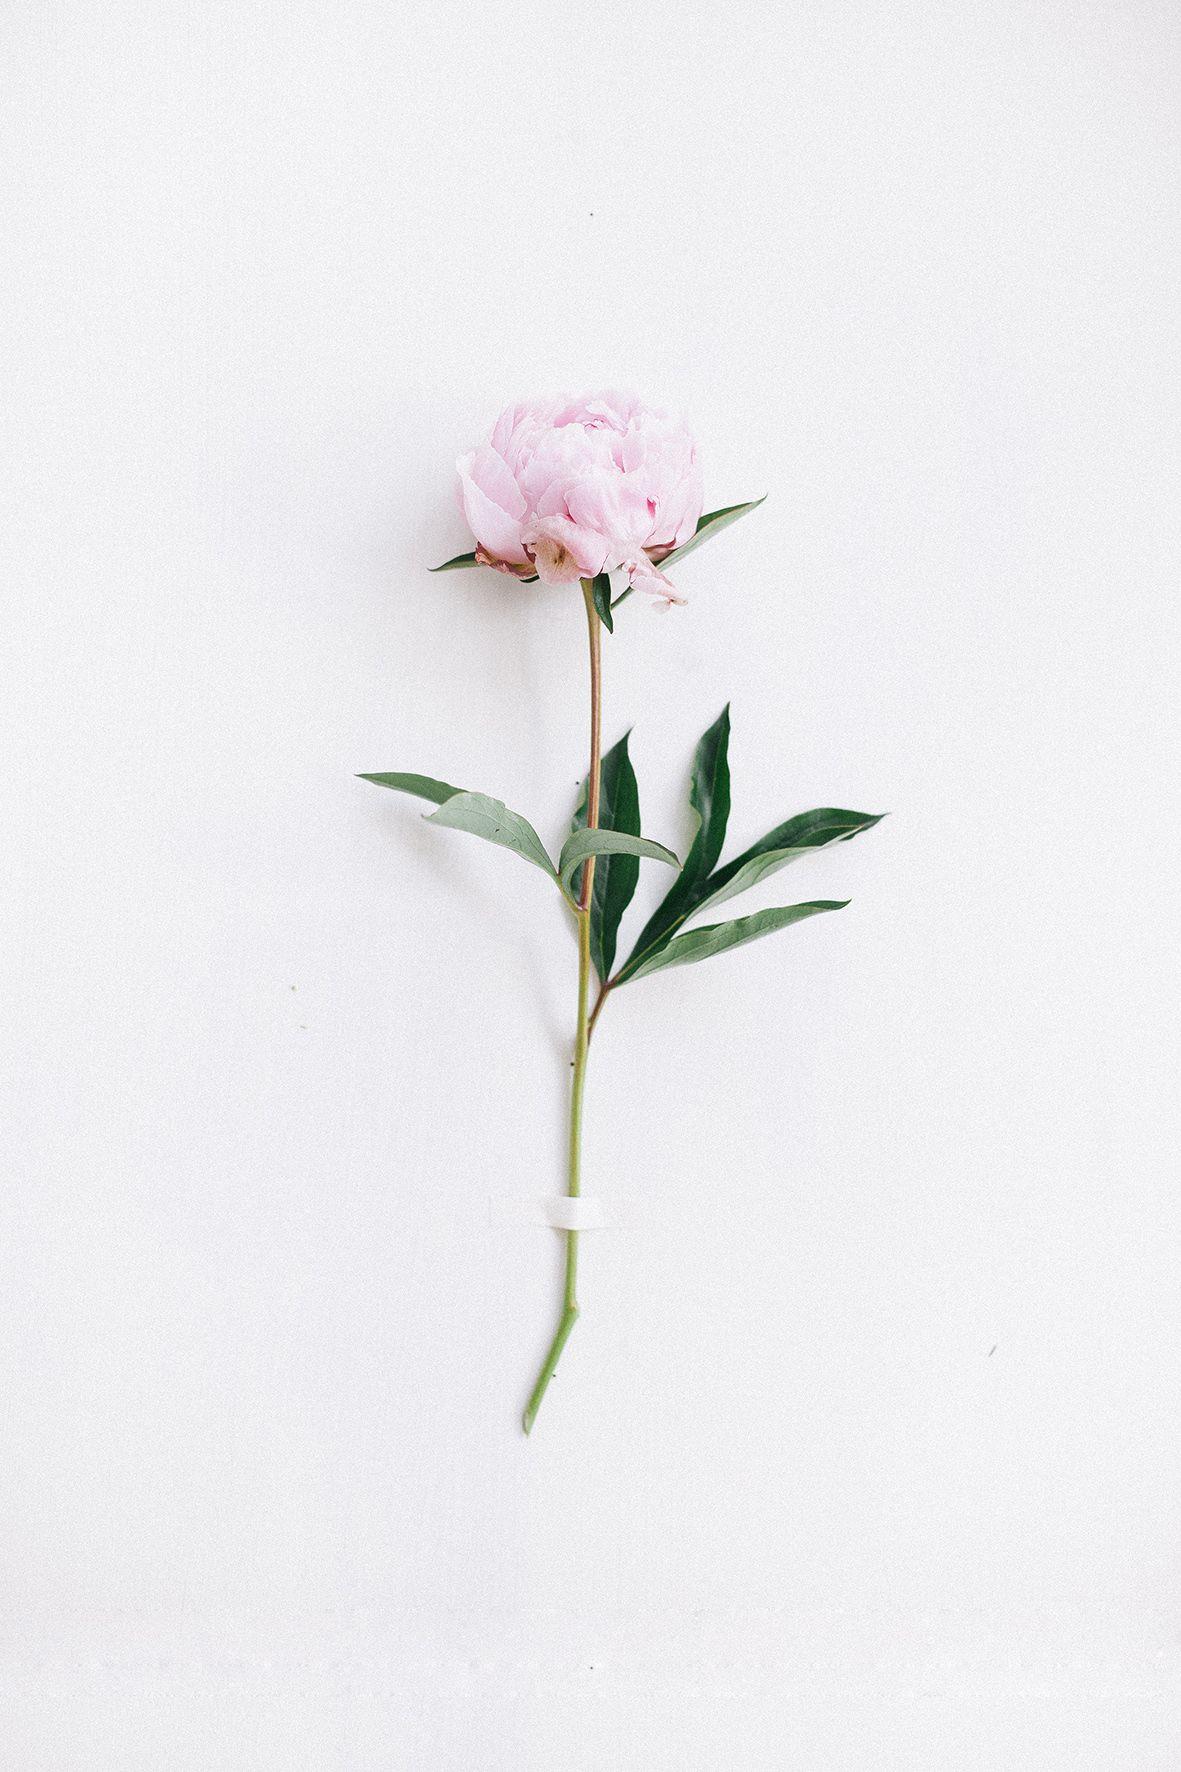 590452 4771x3185 wallpaper, minimal, red, flower, one, life, wall, Free  stock photos, rose, single, plant, green, alone - Rare Gallery HD Wallpapers